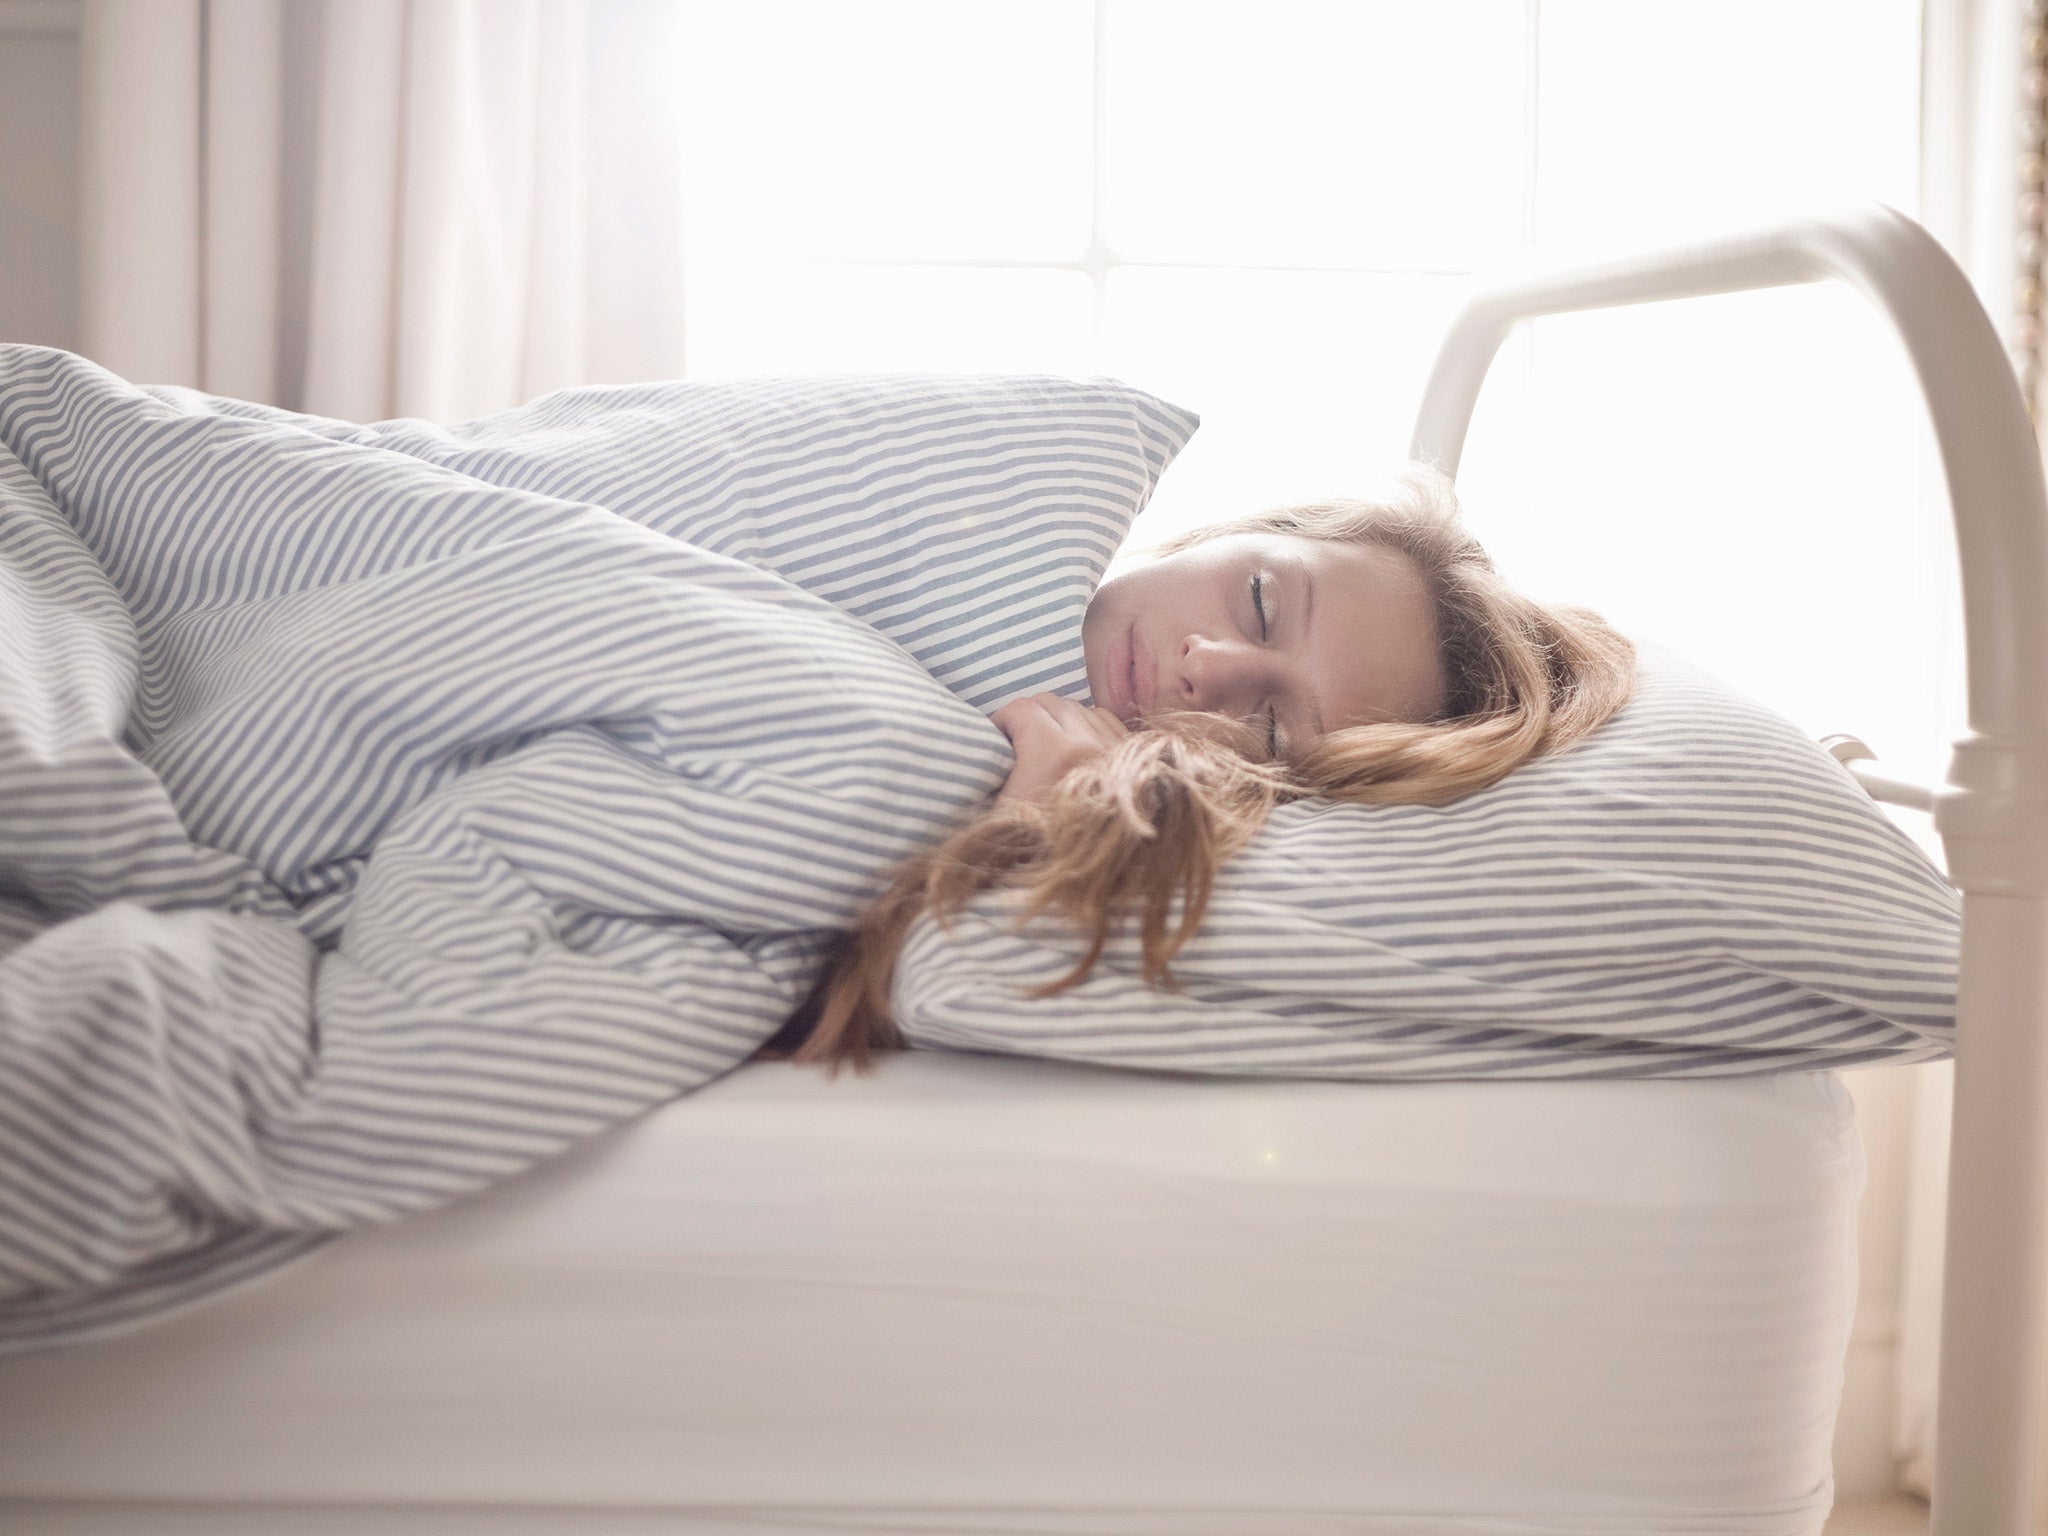 Lack of sleep has been linked with disruptions to the body’s metabolism